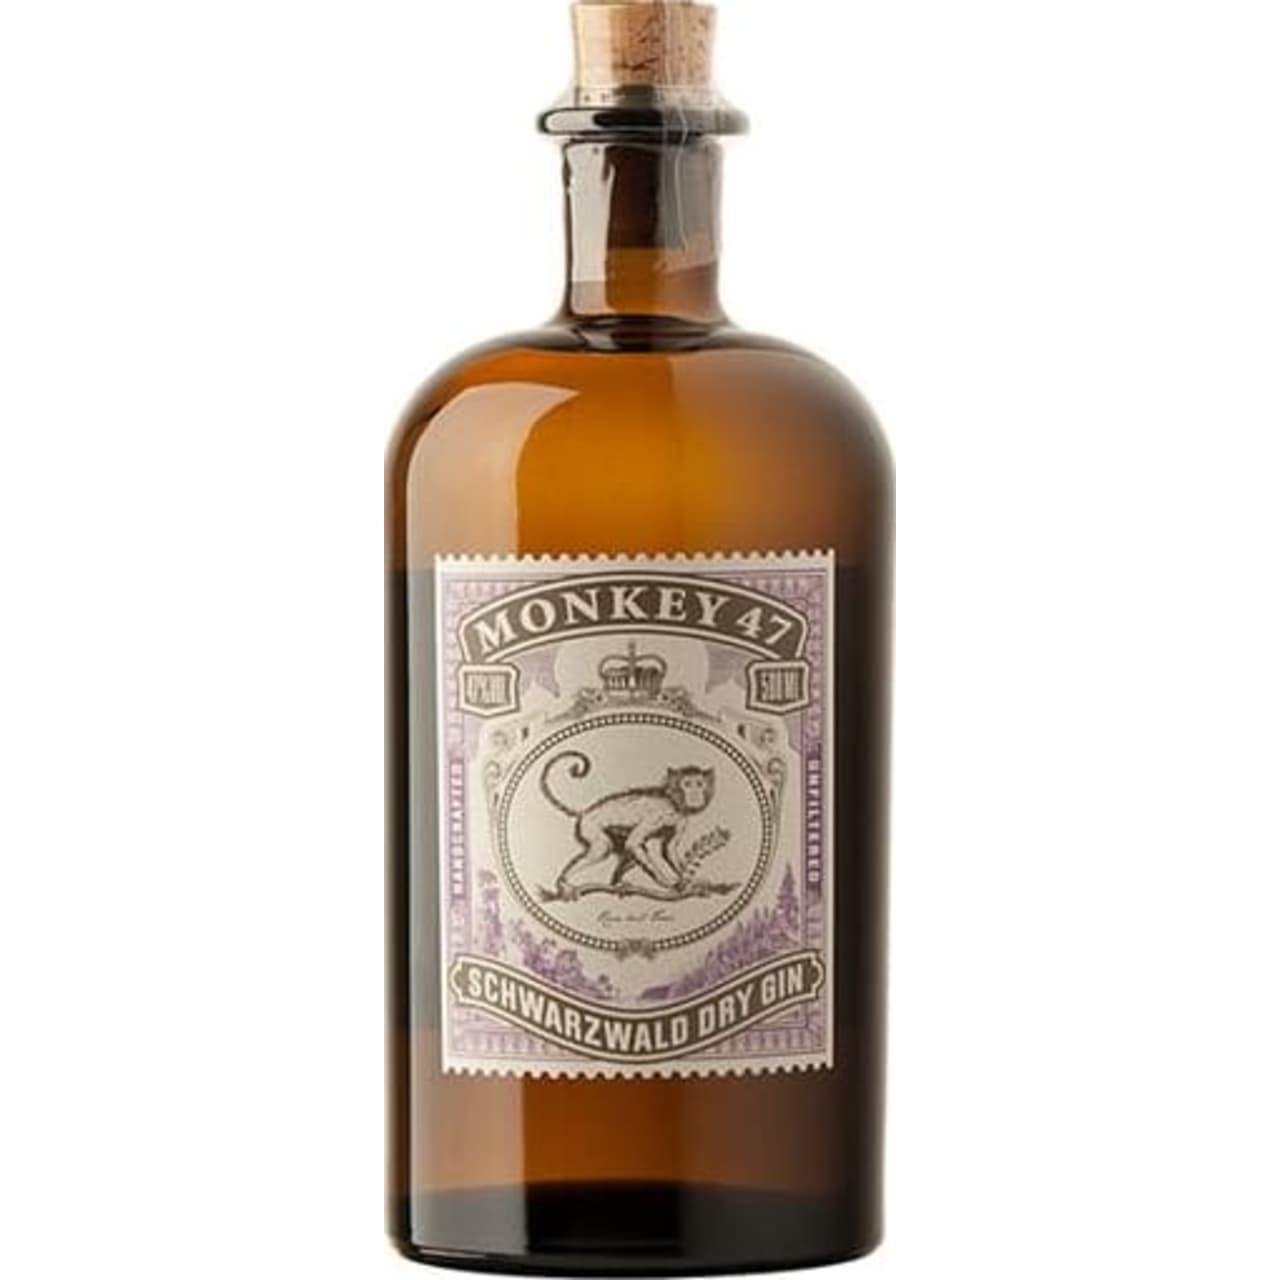 Monkey 47 has a distinct and pure scent of juniper, a tangy and crisp citrus note, a sweet, floral aroma, a hint of peppery spices, subtle bitter cranberry fruit and a deep and harmoniously balaned complexity.